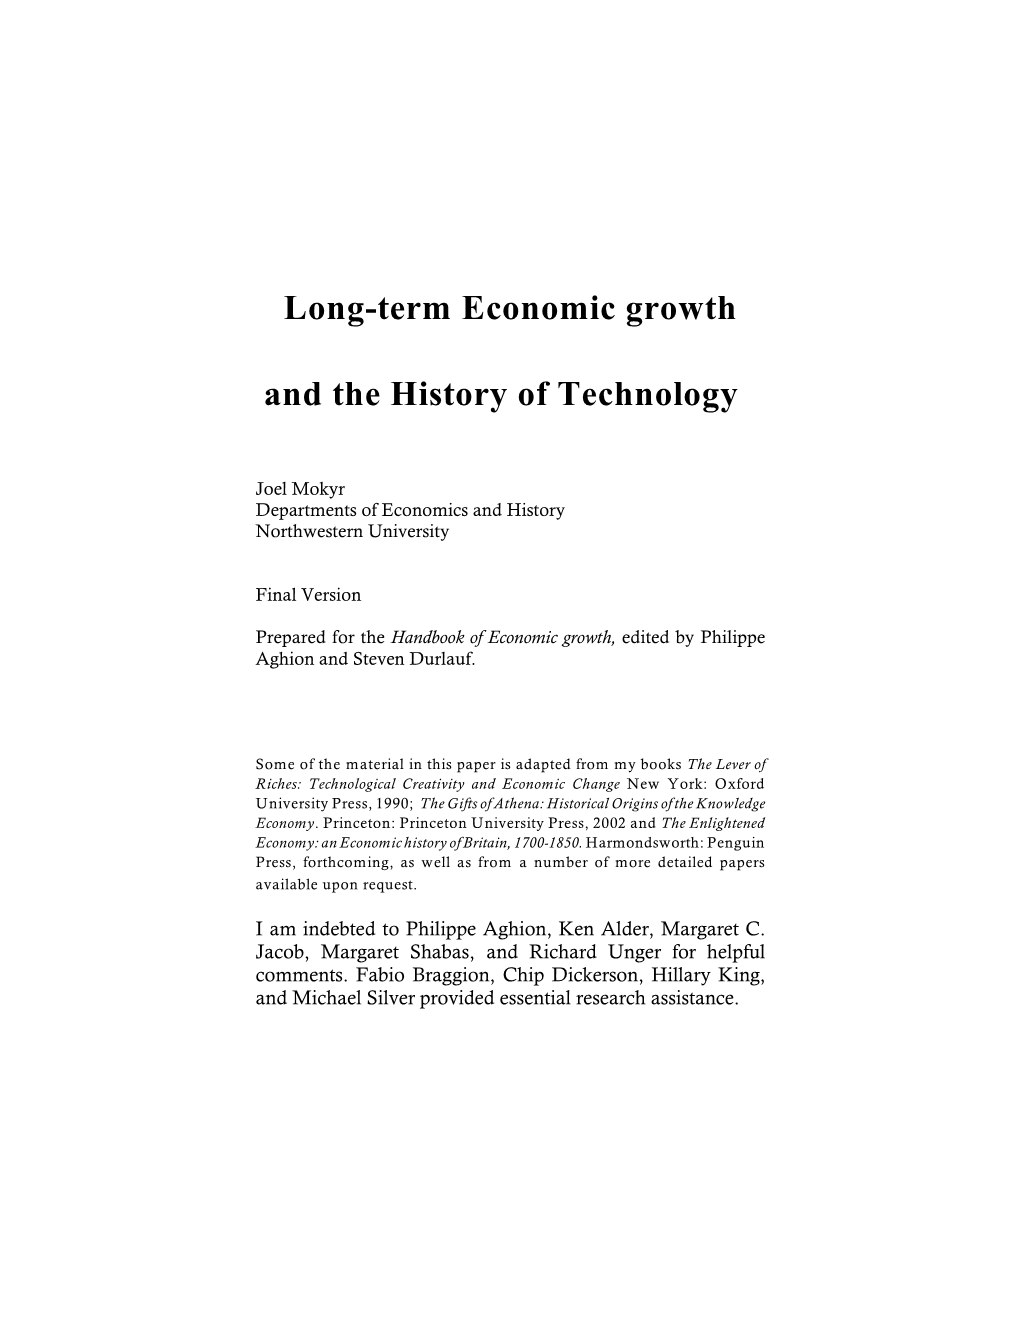 Long-Term Economic Growth and the History of Technology